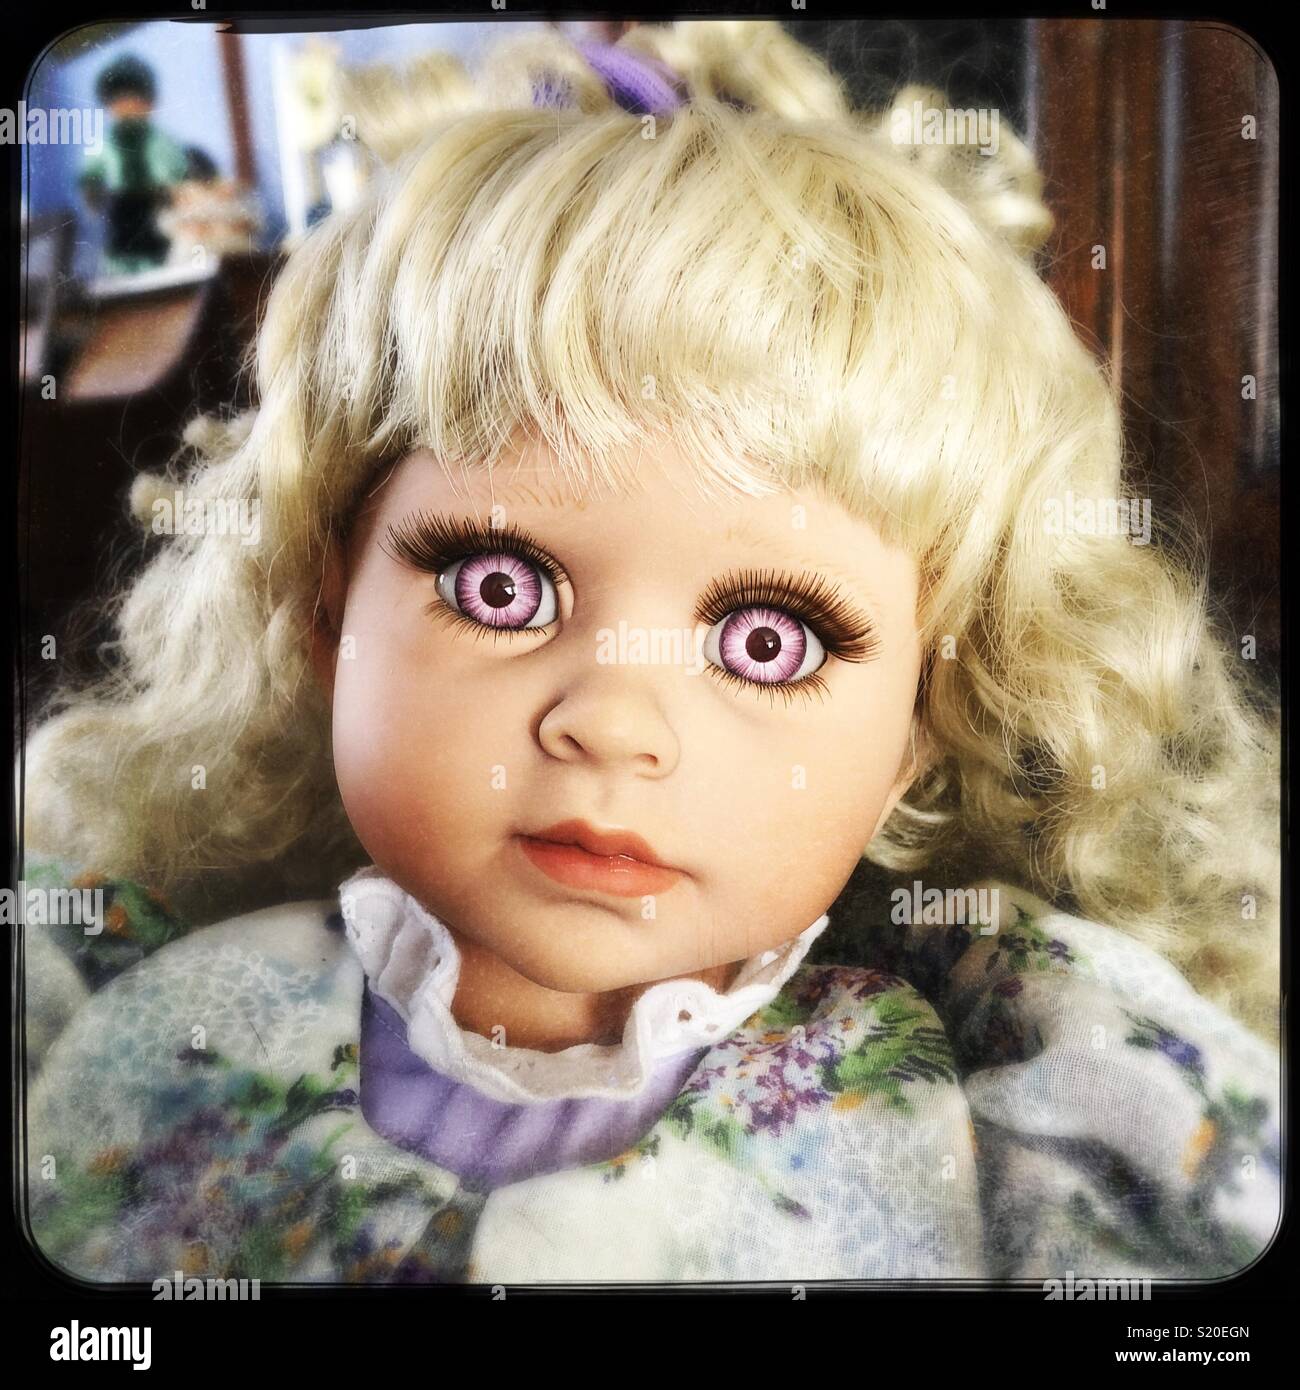 Dolly With Purple Eyes Stock Photo Alamy